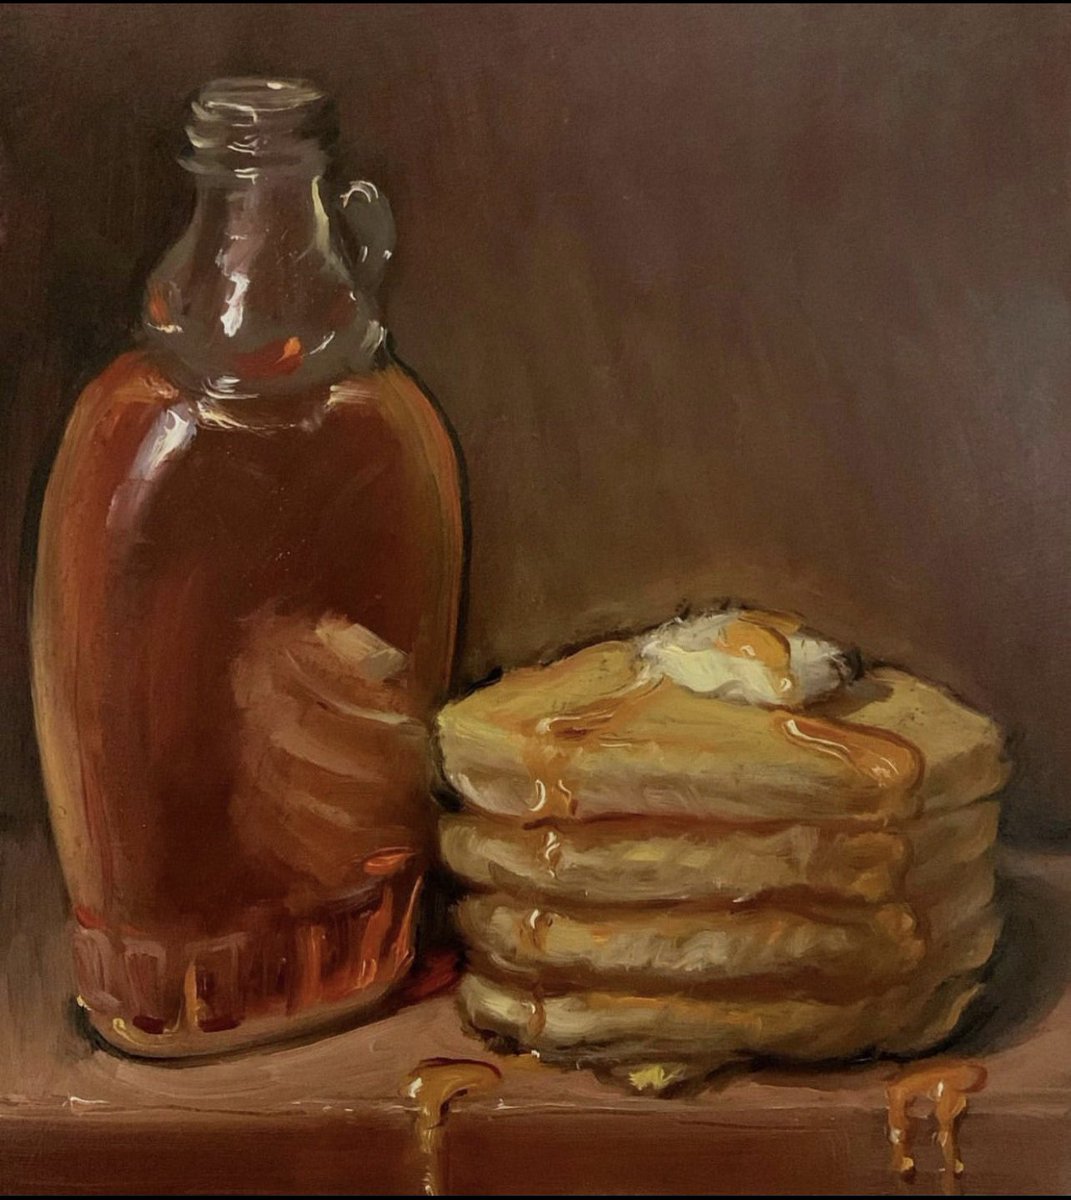 My oil painting of Pancakes & Syrup